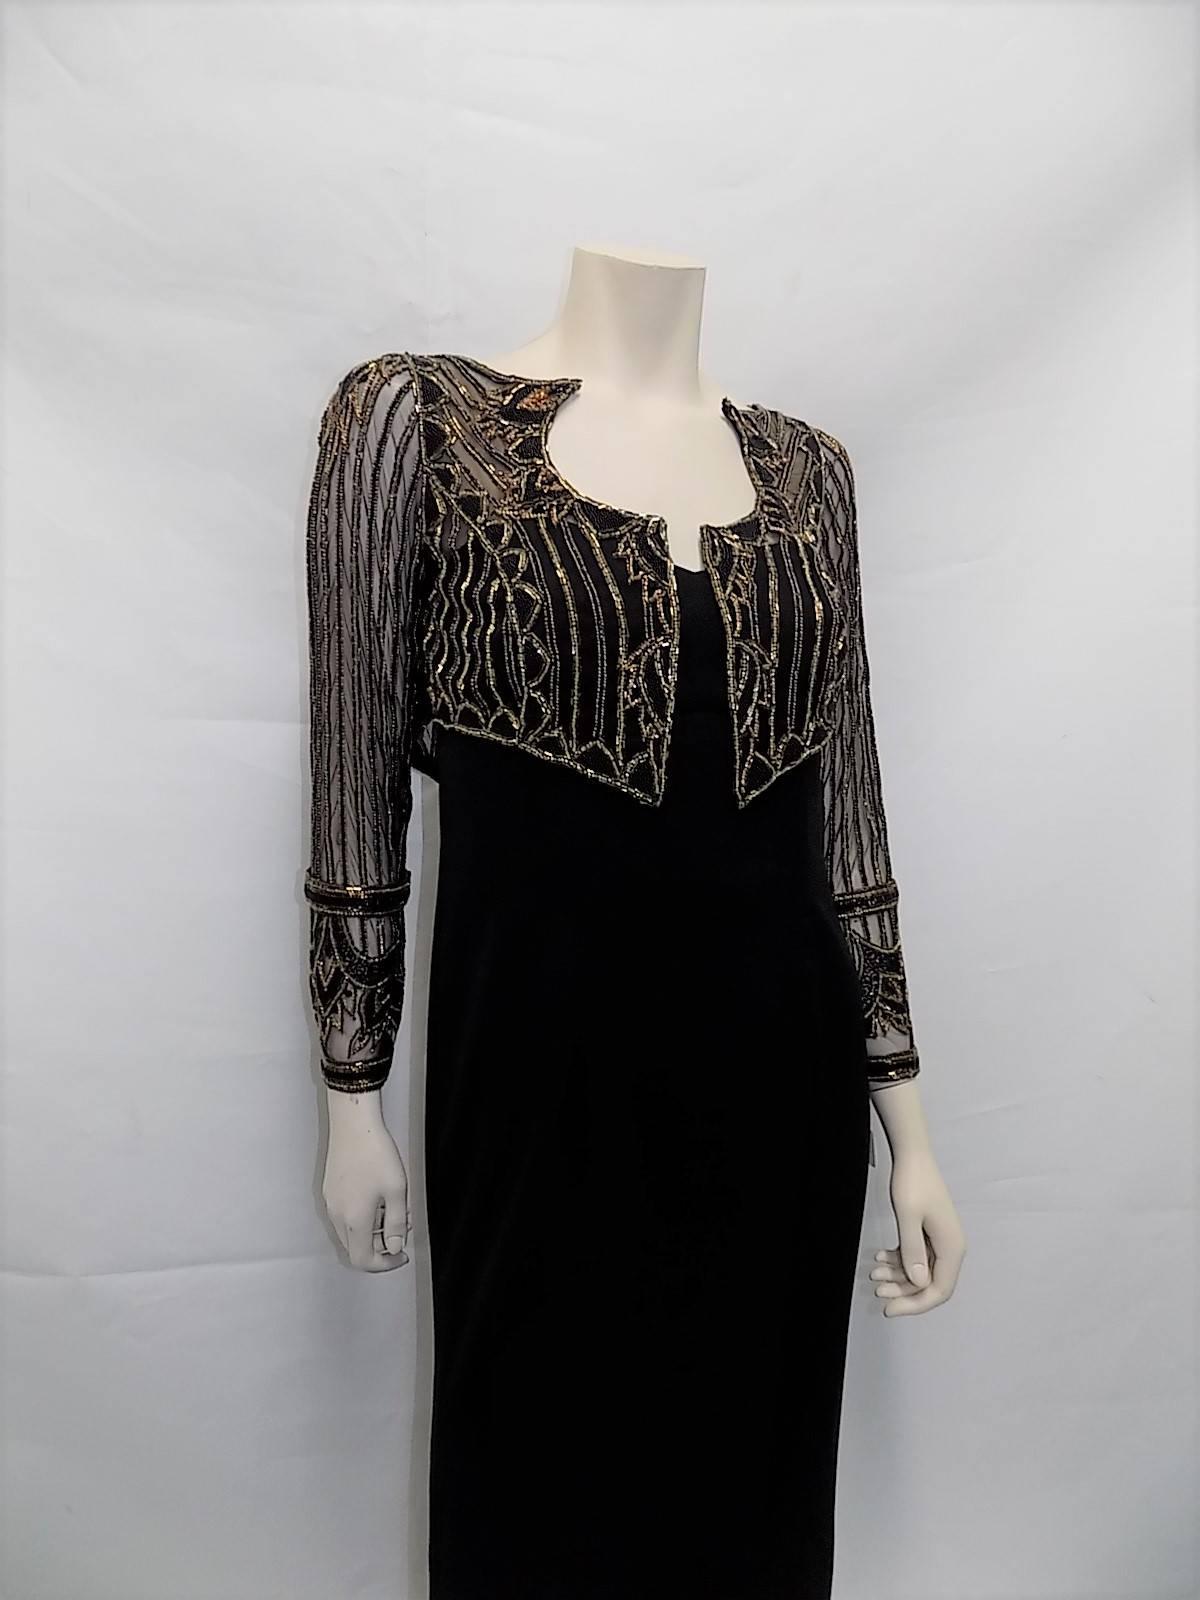 Fabulous black crepe Bob Mackie black Gown Wit Beaded illusion bolero. Jacket is actually attached to a dress. Gold and Black Bugle and caviar beads over mash. Fully boned corset. Size 6. bust 36